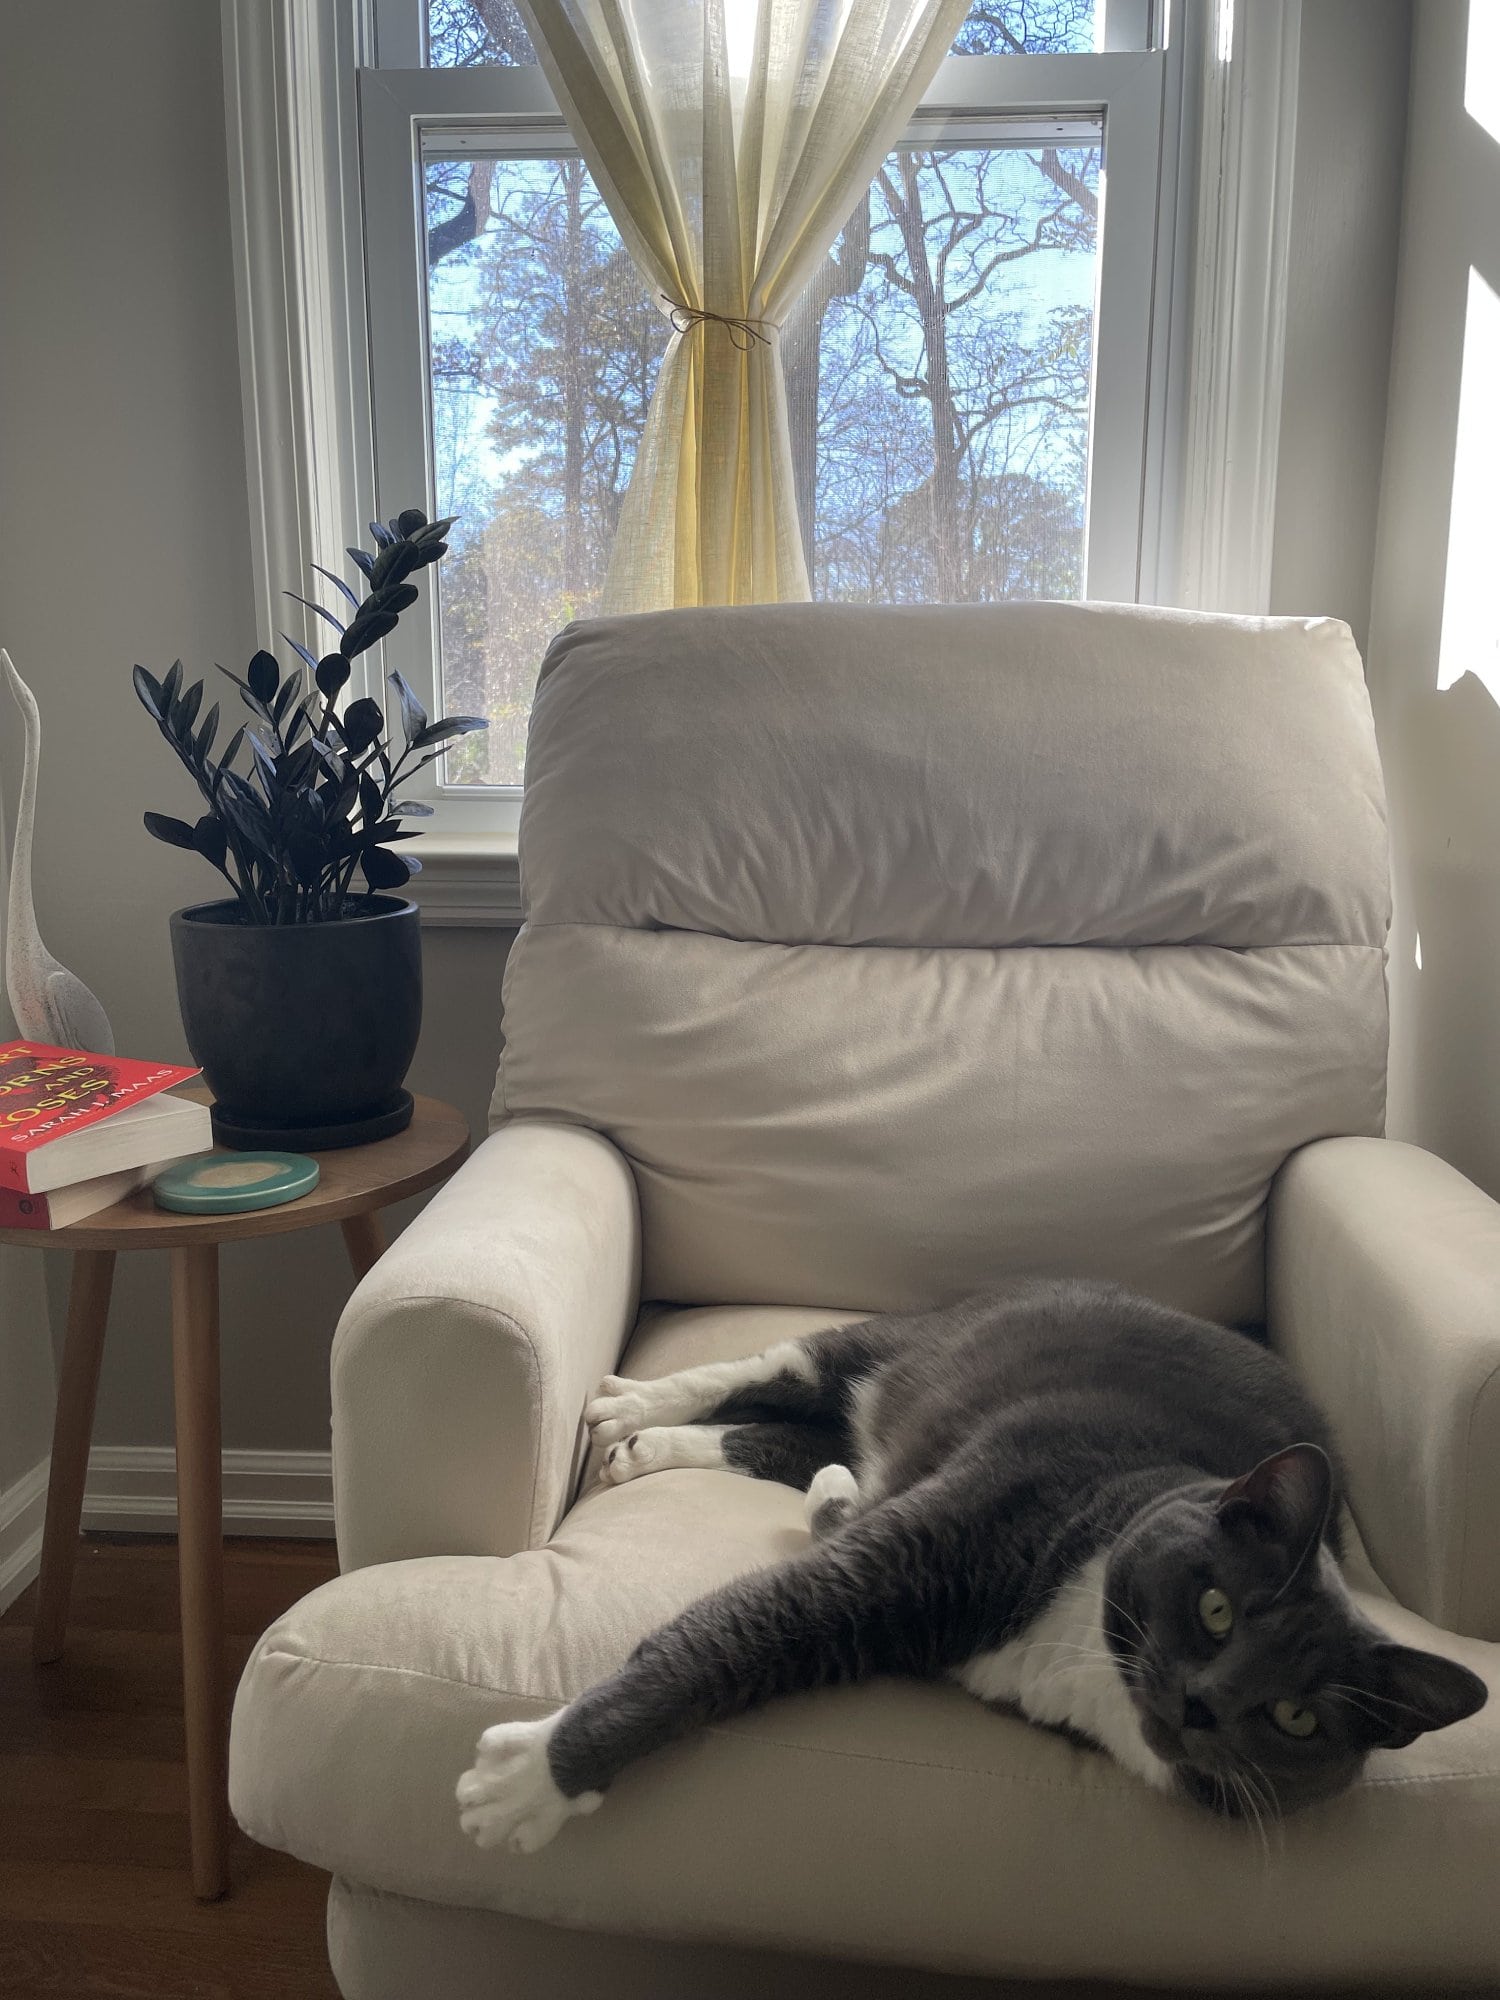 A black and white cat lounging on a chair in a small home office